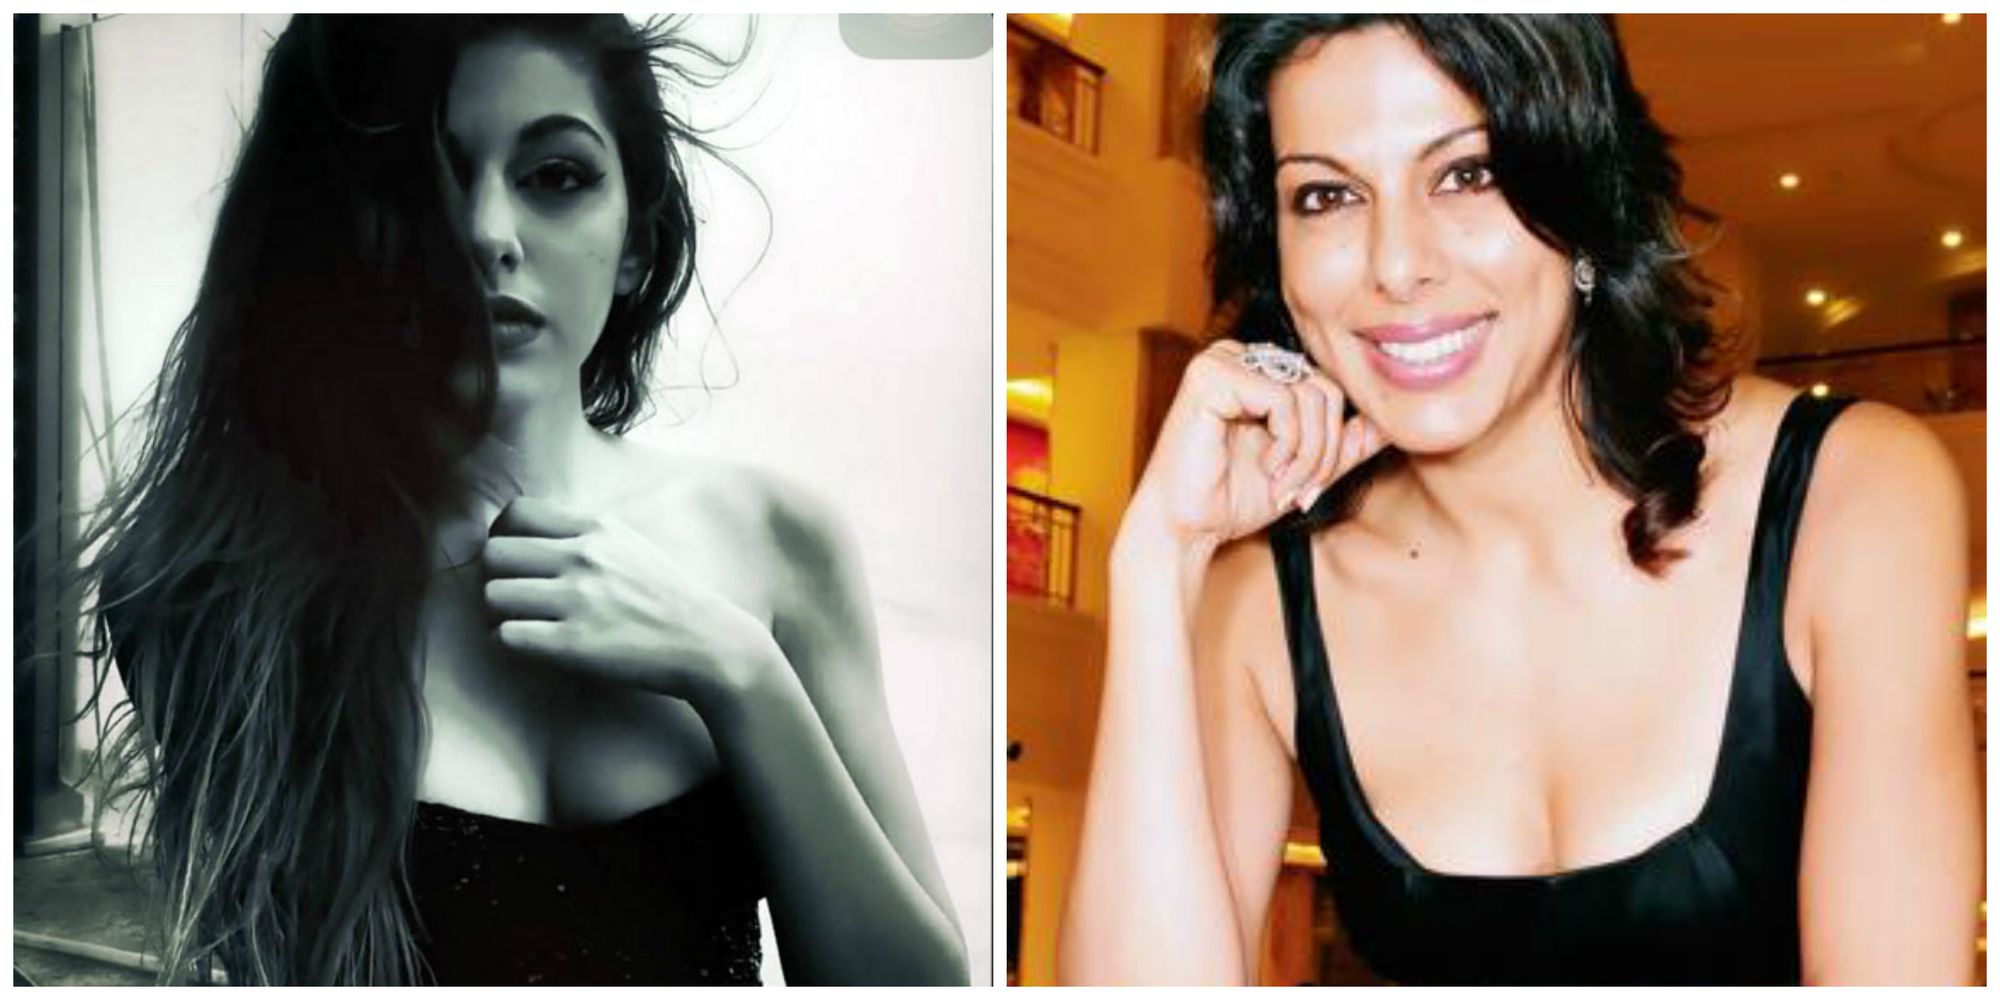 Pooja Bedi Reacts To Her Daughter Being Slut Shamed On The Internet!